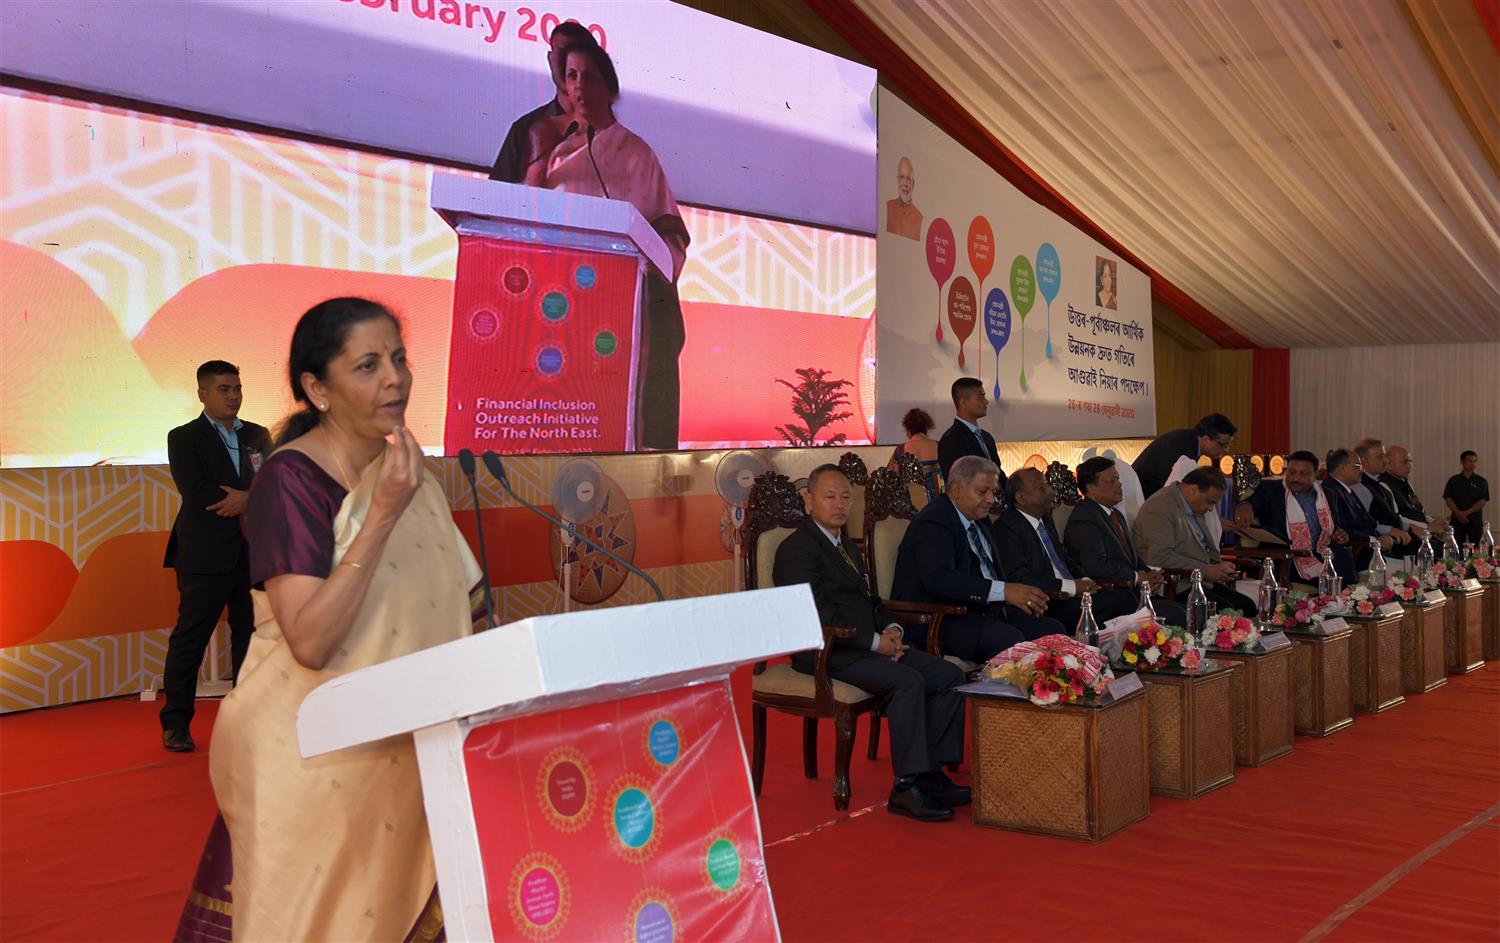 Union Minister of Finance & Corporate Affairs, Smt. Nirmala Sitharaman, addressing a meeting of Bankers at Assam Administrative Staff College Guwahati on 27th February 2020.

